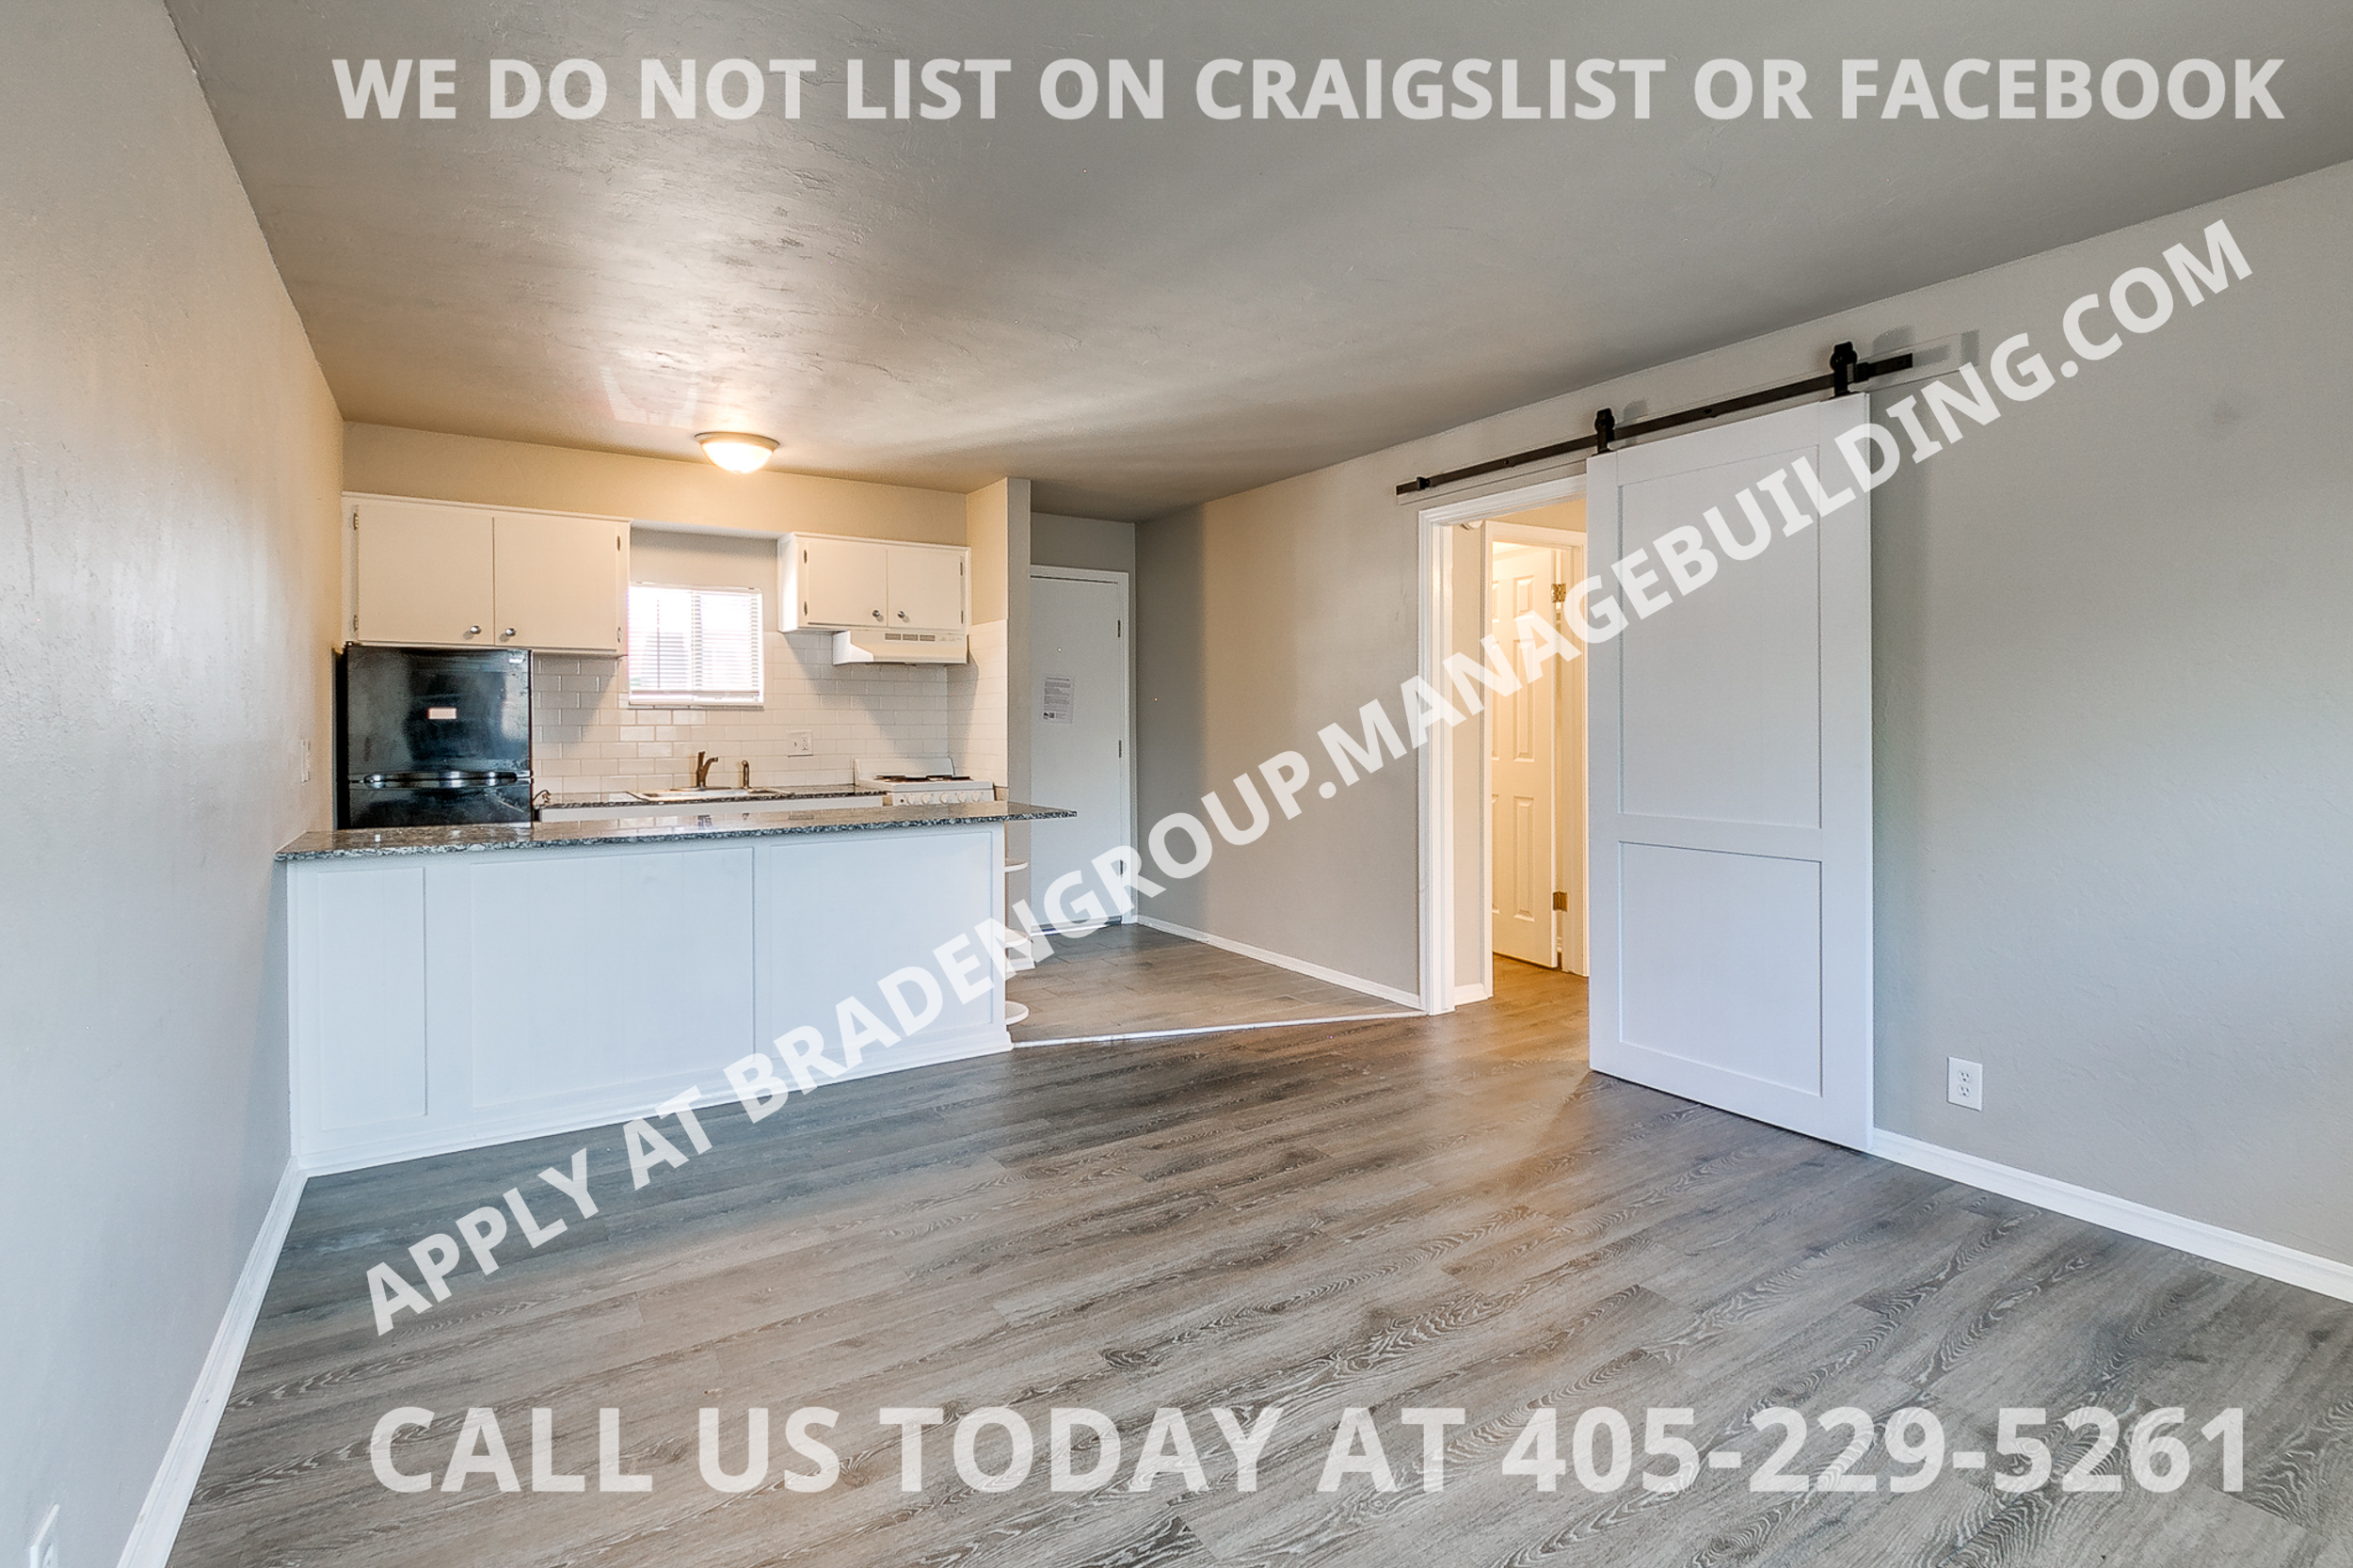 2748 NW 23rd St. Unit 8